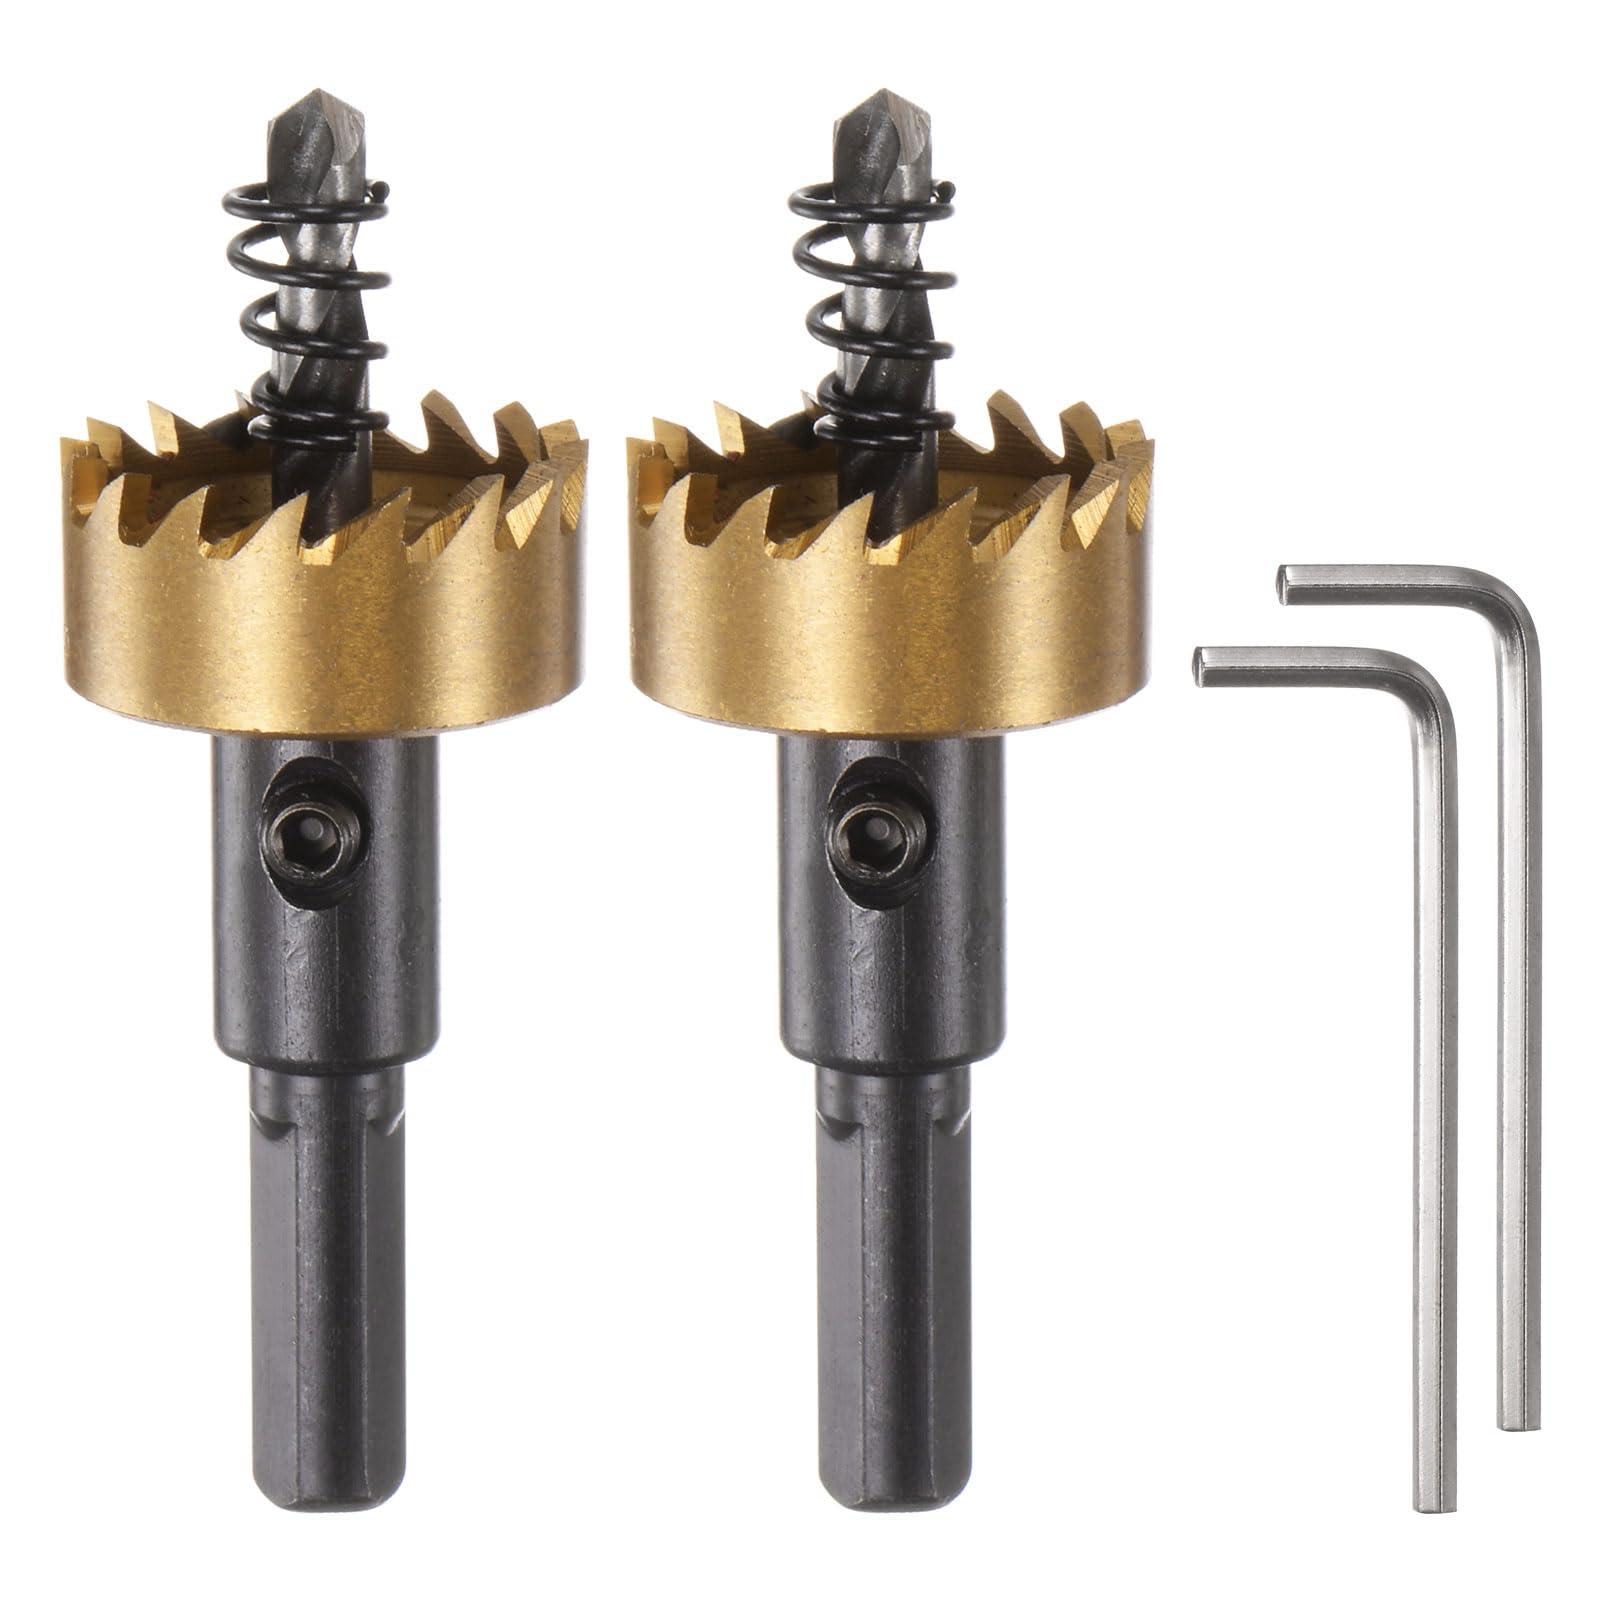 sourcing map 2pcs Hole Saws 26mm (1-2/85") M35 HSS (High Speed Steel) Titanium Coated Drill Bits Cutters Openers for Stainless Steel Aluminum Alloy Metal Wood Plastic 0